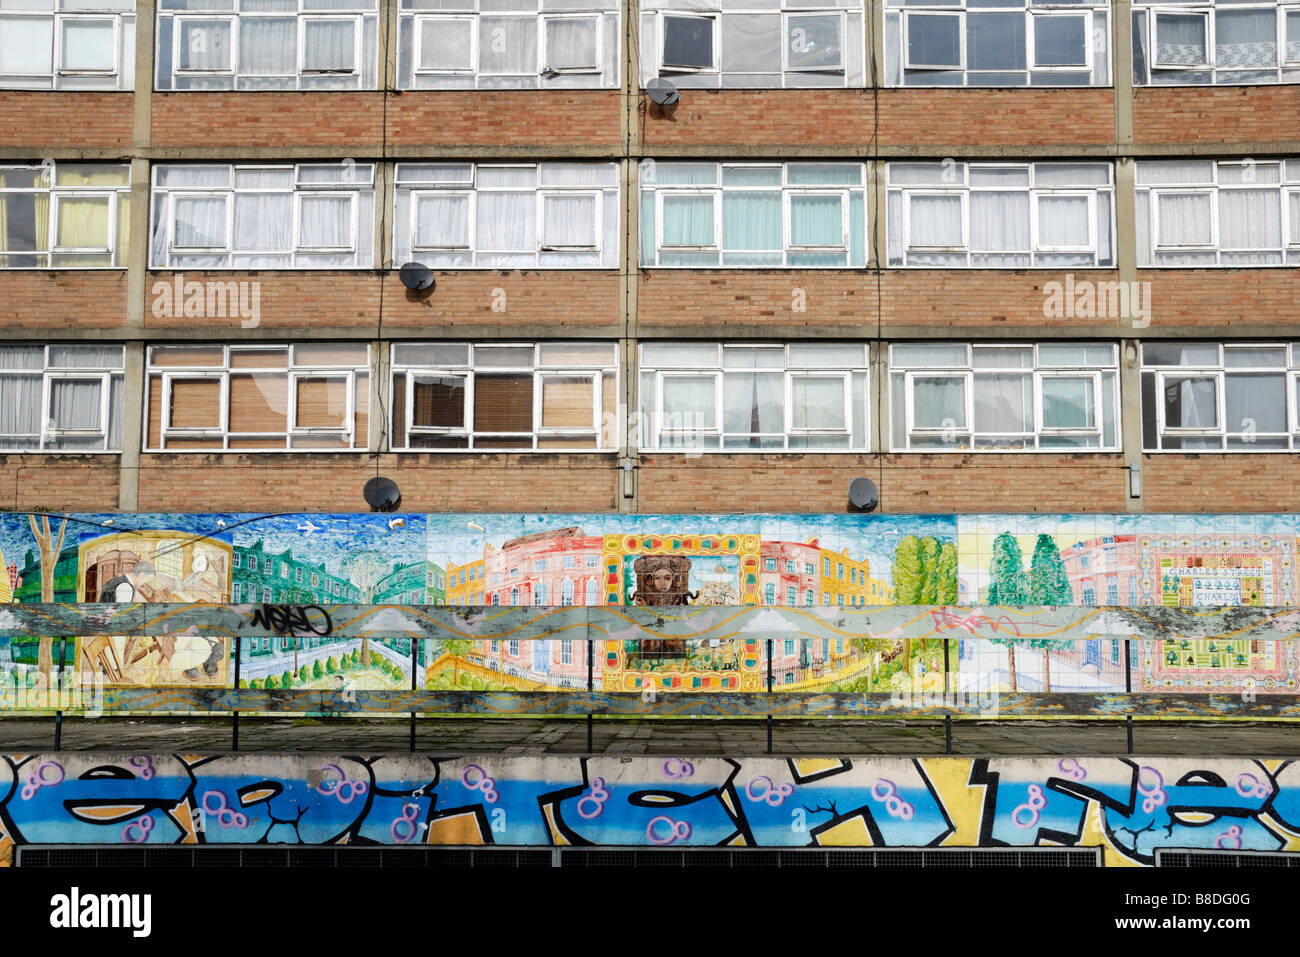 Council housing block and mural painting Stock Photo